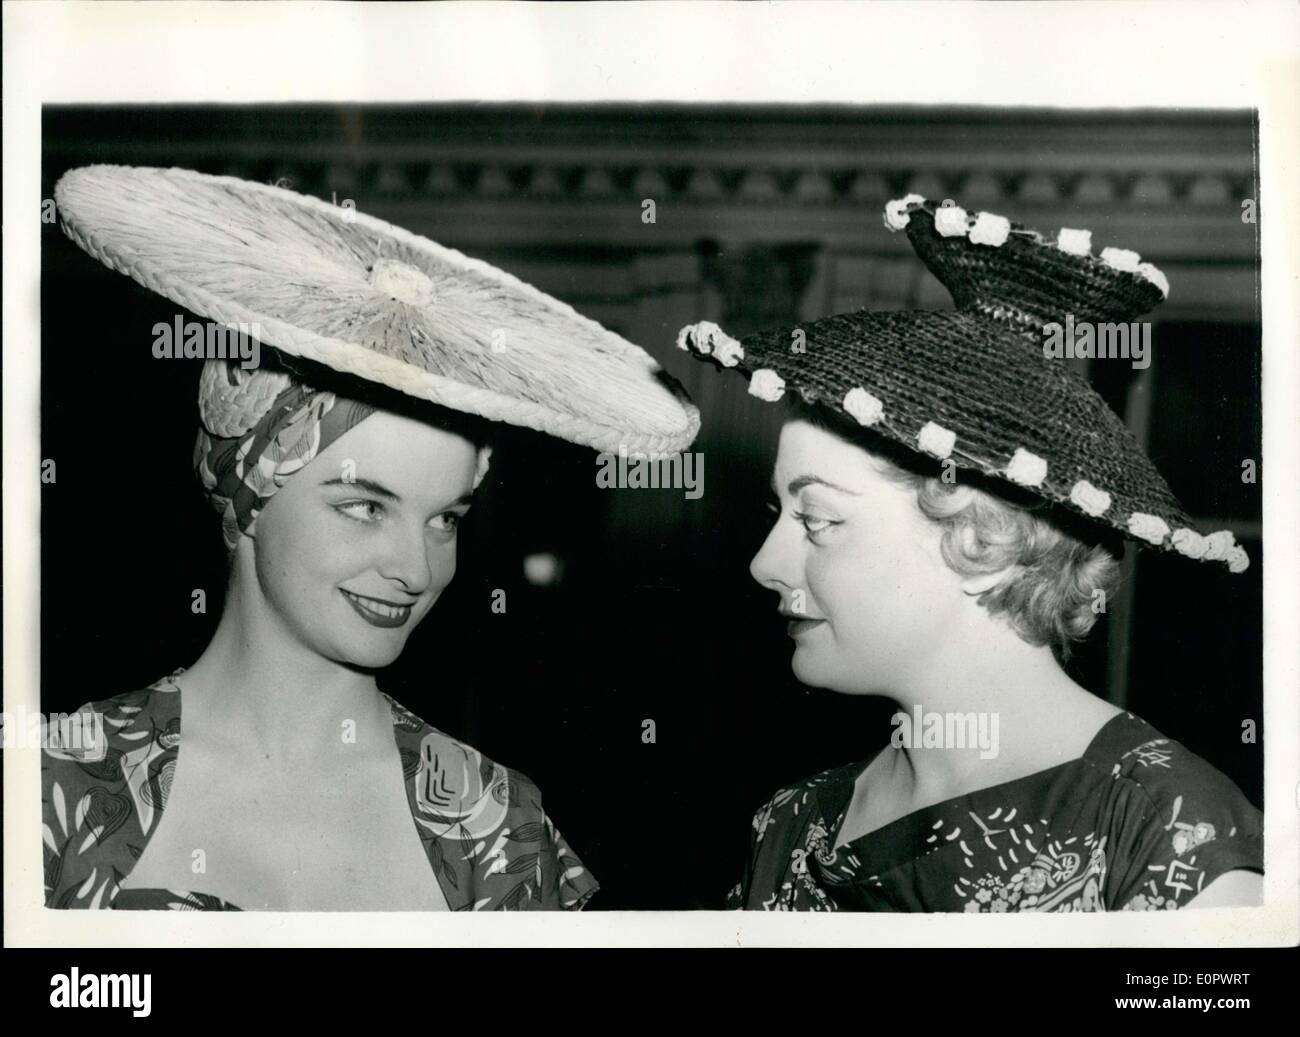 Jan. 07, 1957 - Commonwealth Parade of fashion in London: A rehearsal was held at the Cafe Royal, London this afternoon for tomorrow's Commonwealth Parade of Fashion in which styles from many parts of the world made from Lancashire Cotton will be shown. Photo shows two hats left: Faye Bresner wears a large sunhat in natural raffia and Dorothea Stafford wears creation in black straw with blue bobbles. Stock Photo